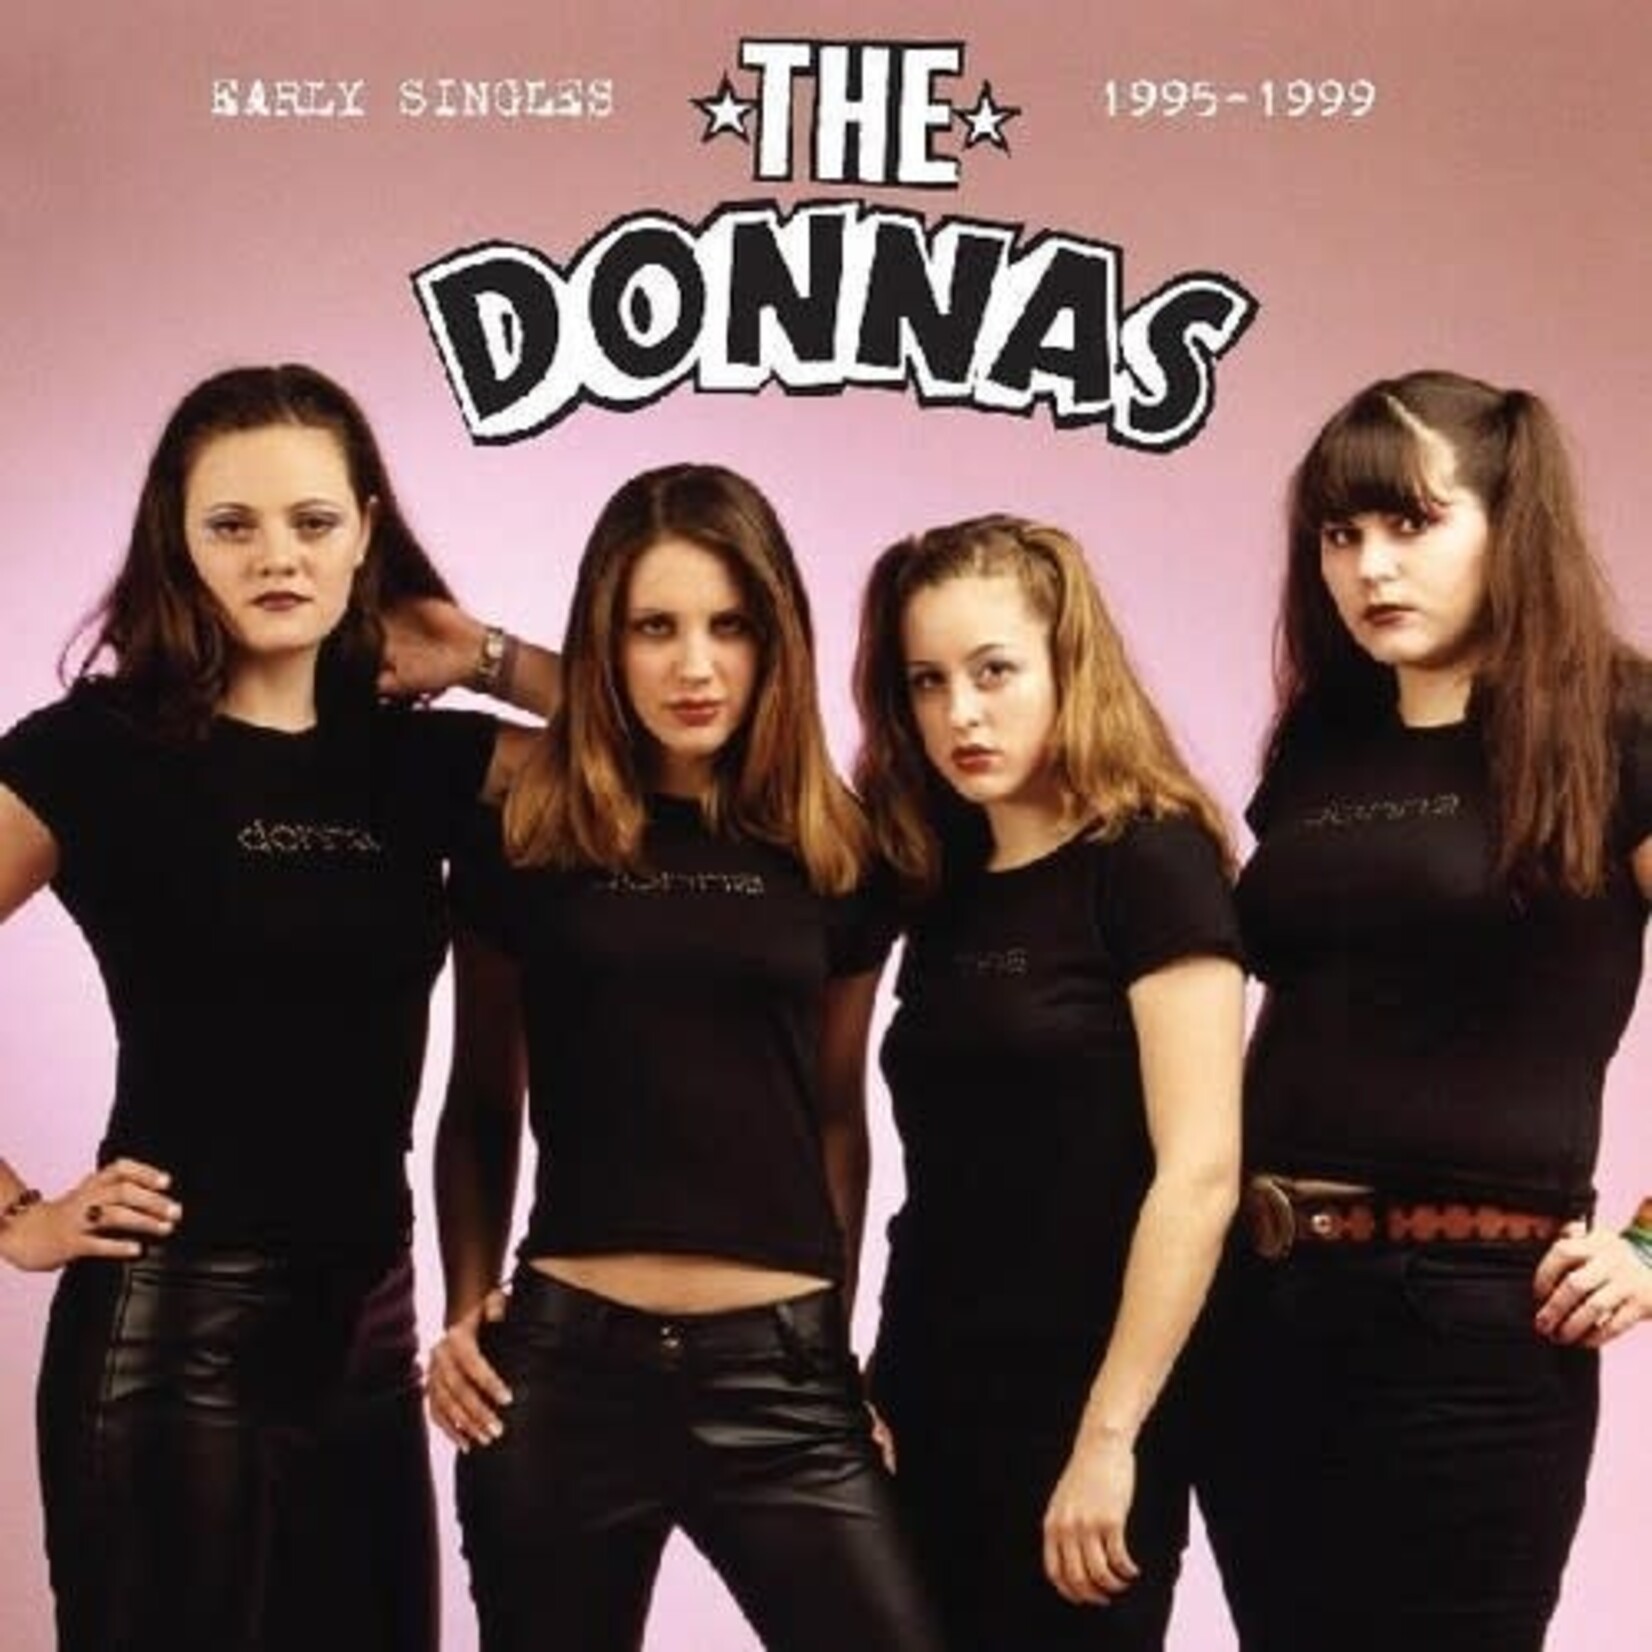 [New] Donnas, The: Early Singles 1995-1999 (Dark Purple Vinyl) [REAL GONE MUSIC]